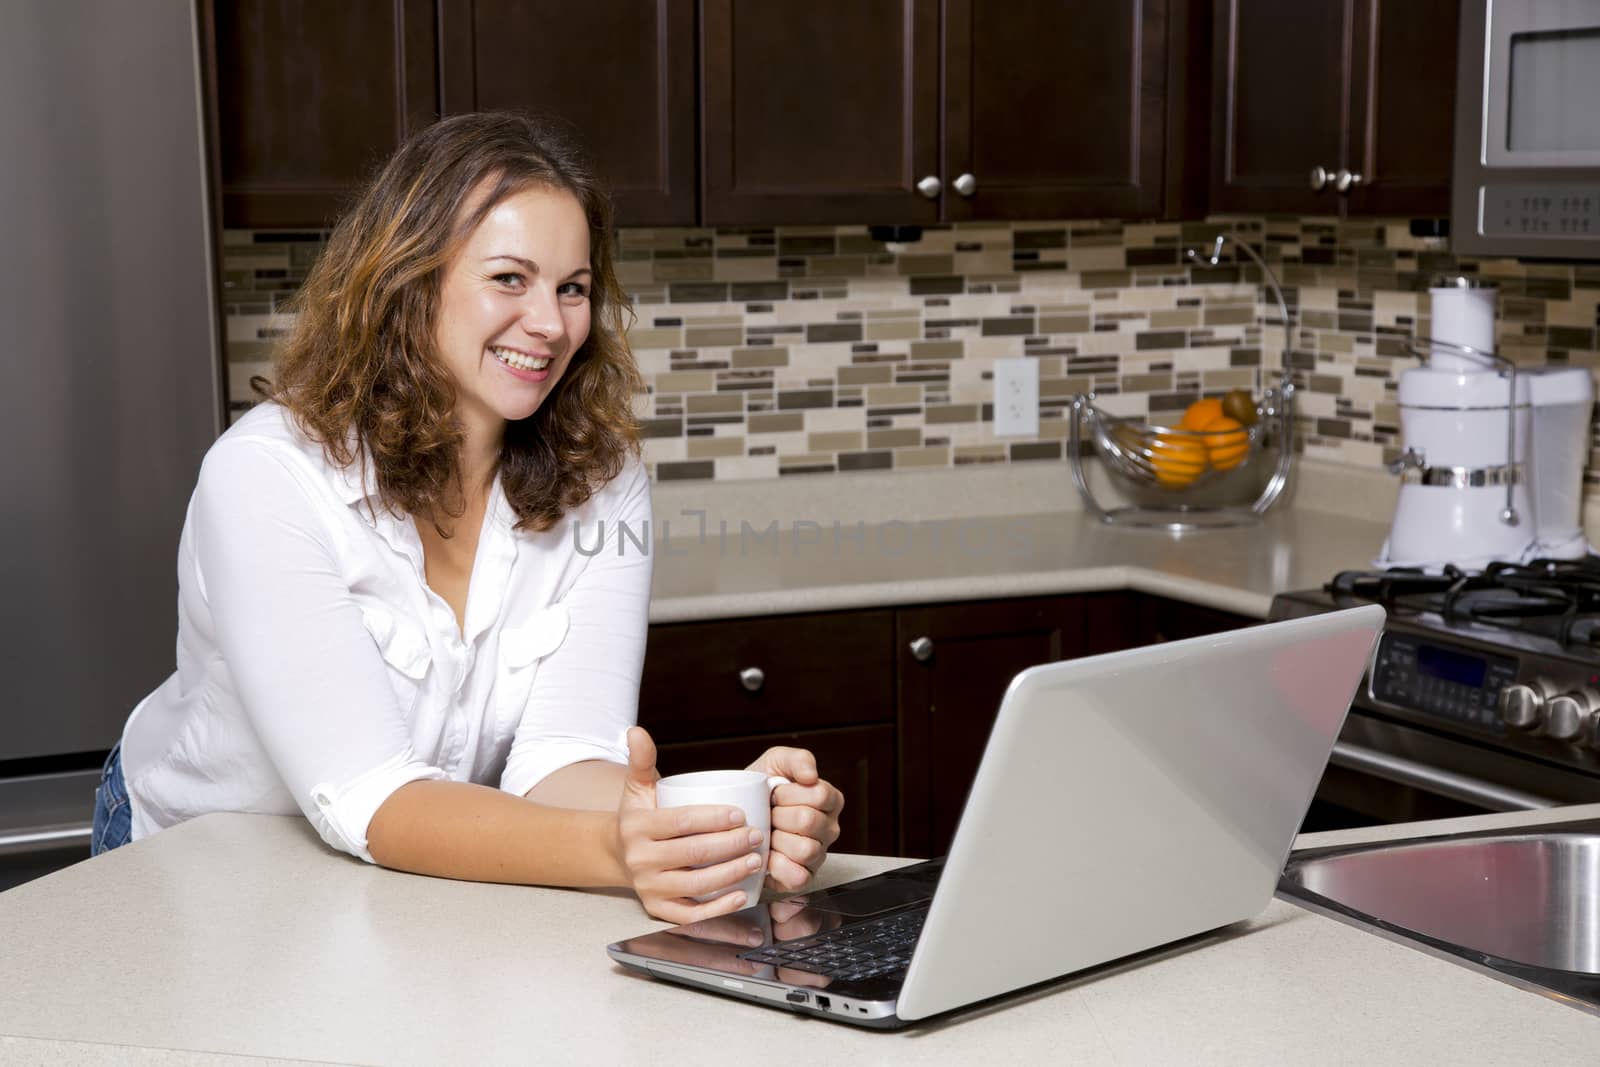 woman drinking coffee while working on the laptop in the kitchen